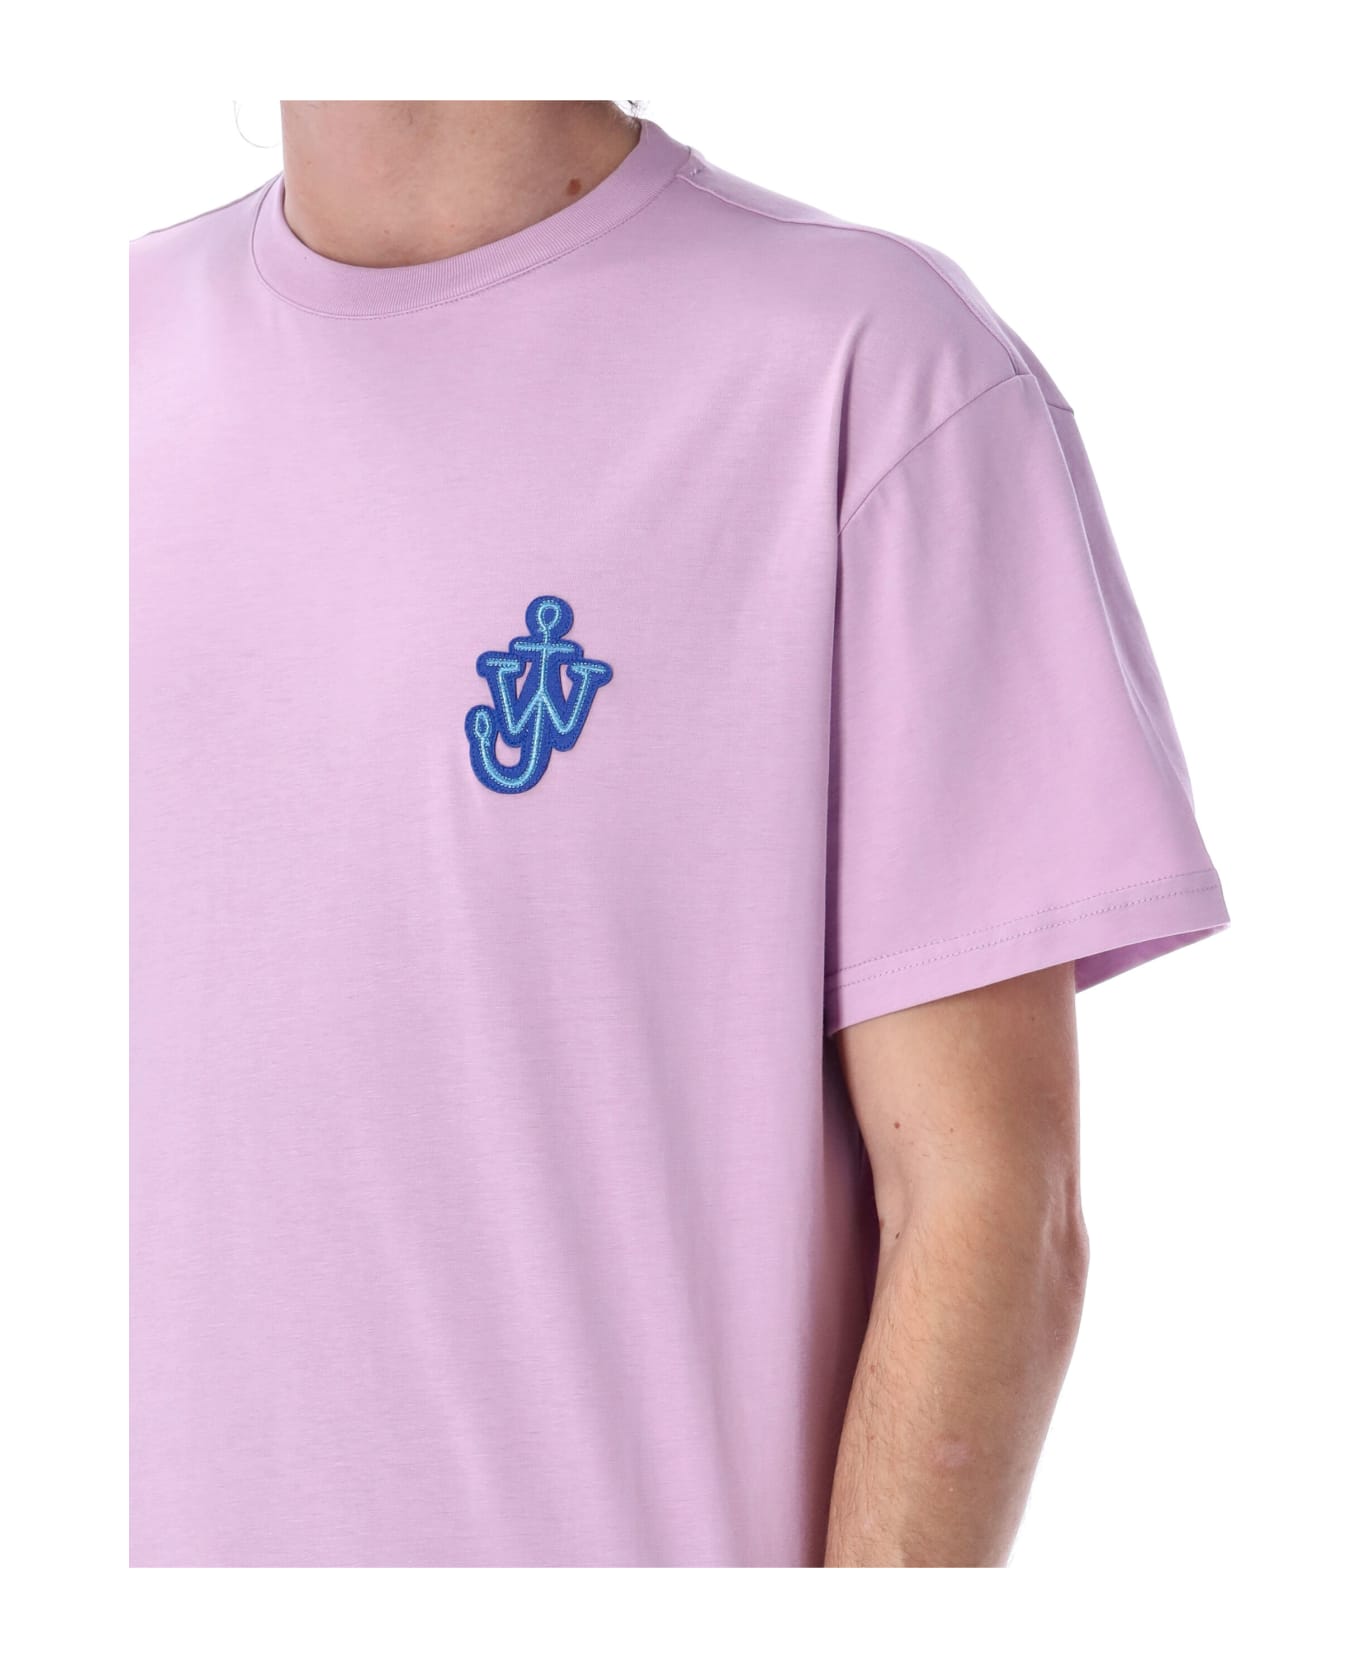 J.W. Anderson Anchor Patch T-shirt - PINK